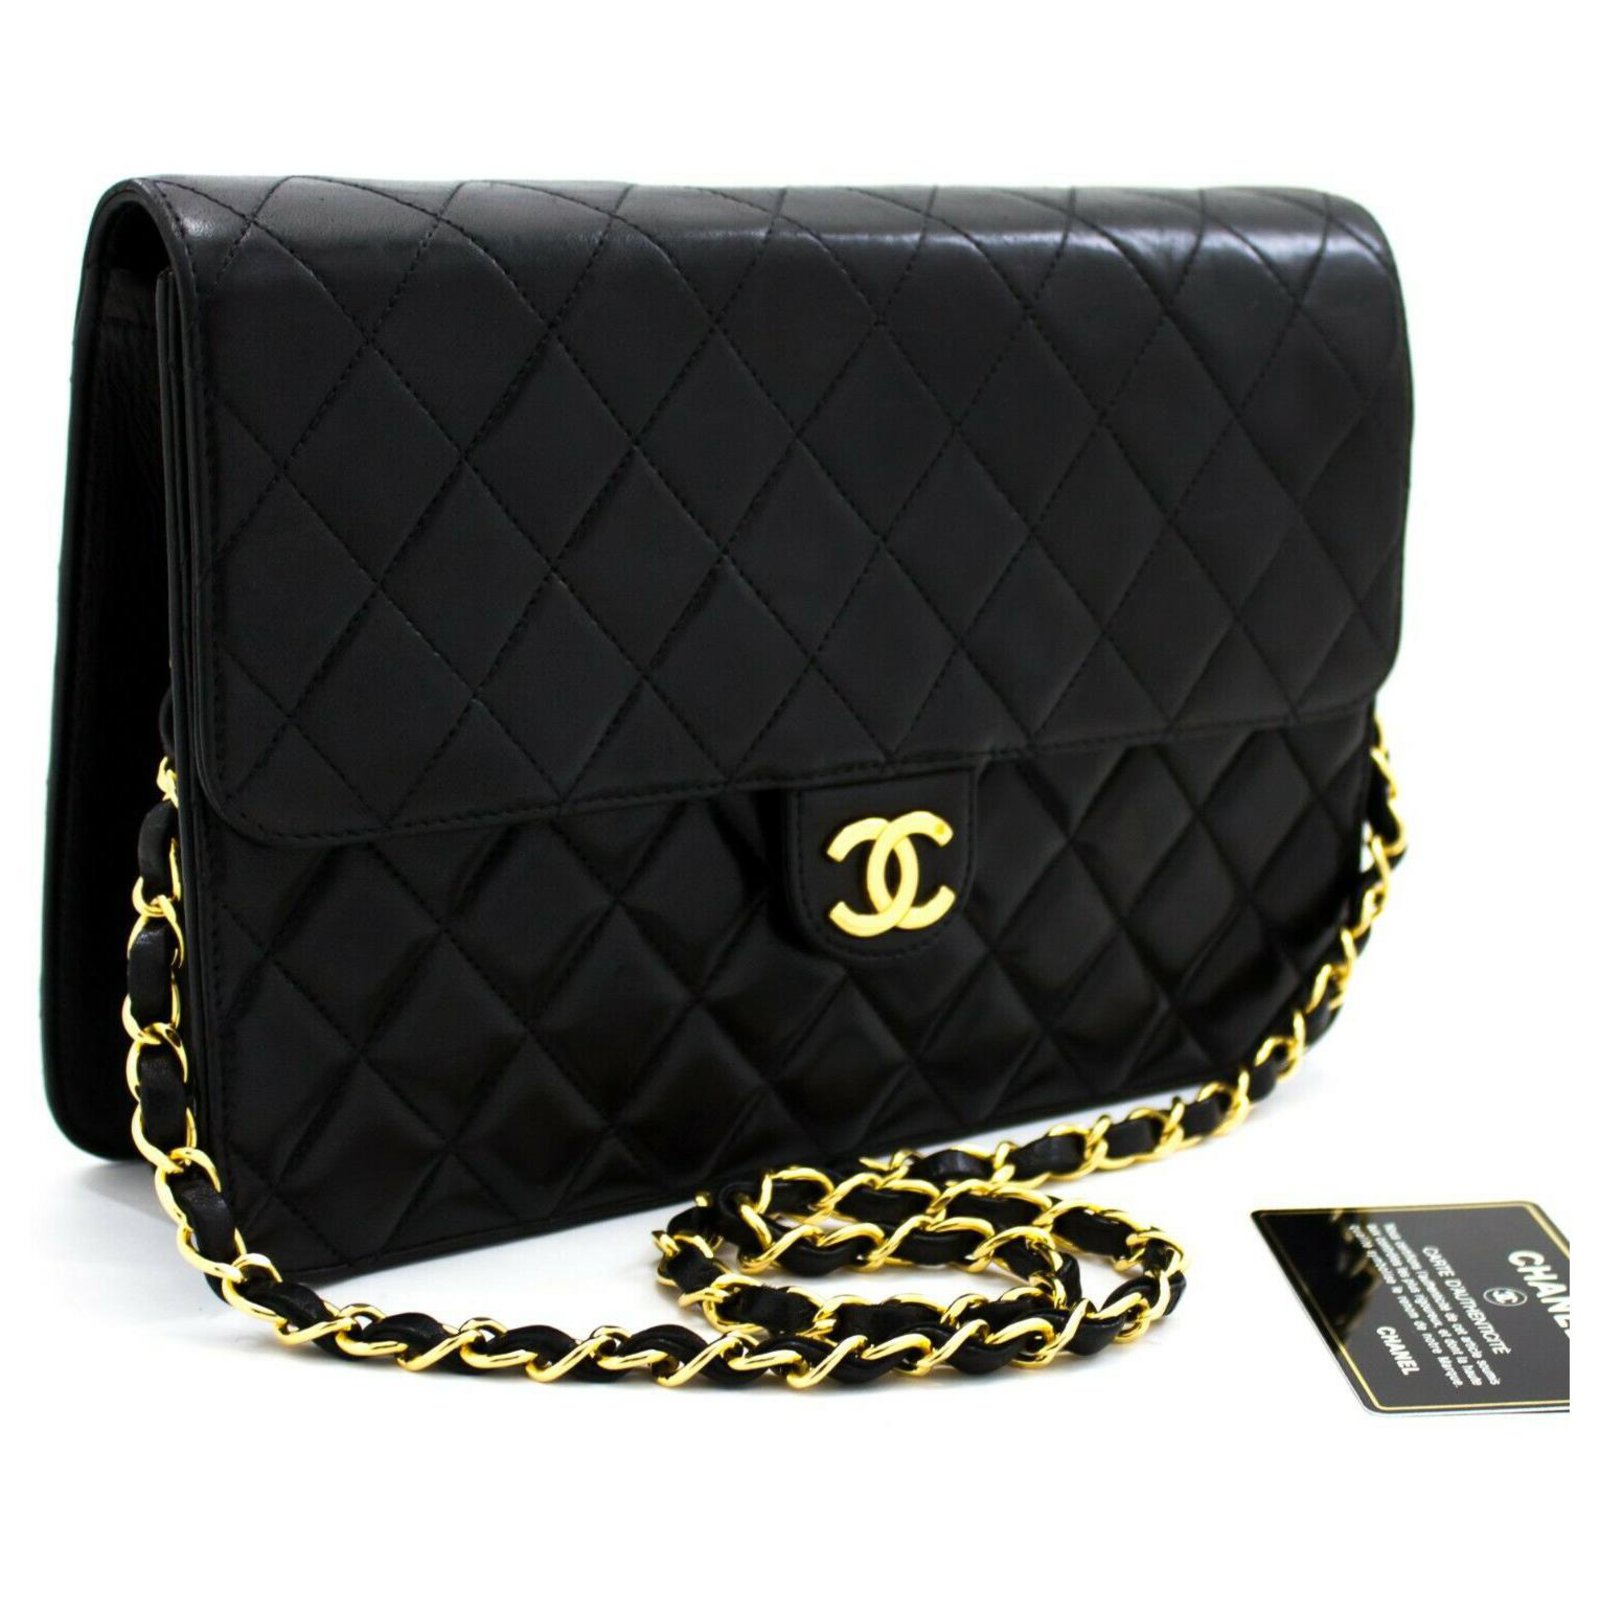 Chanel Small Black Quilted Leather Shoulder Bag with Gold Chain